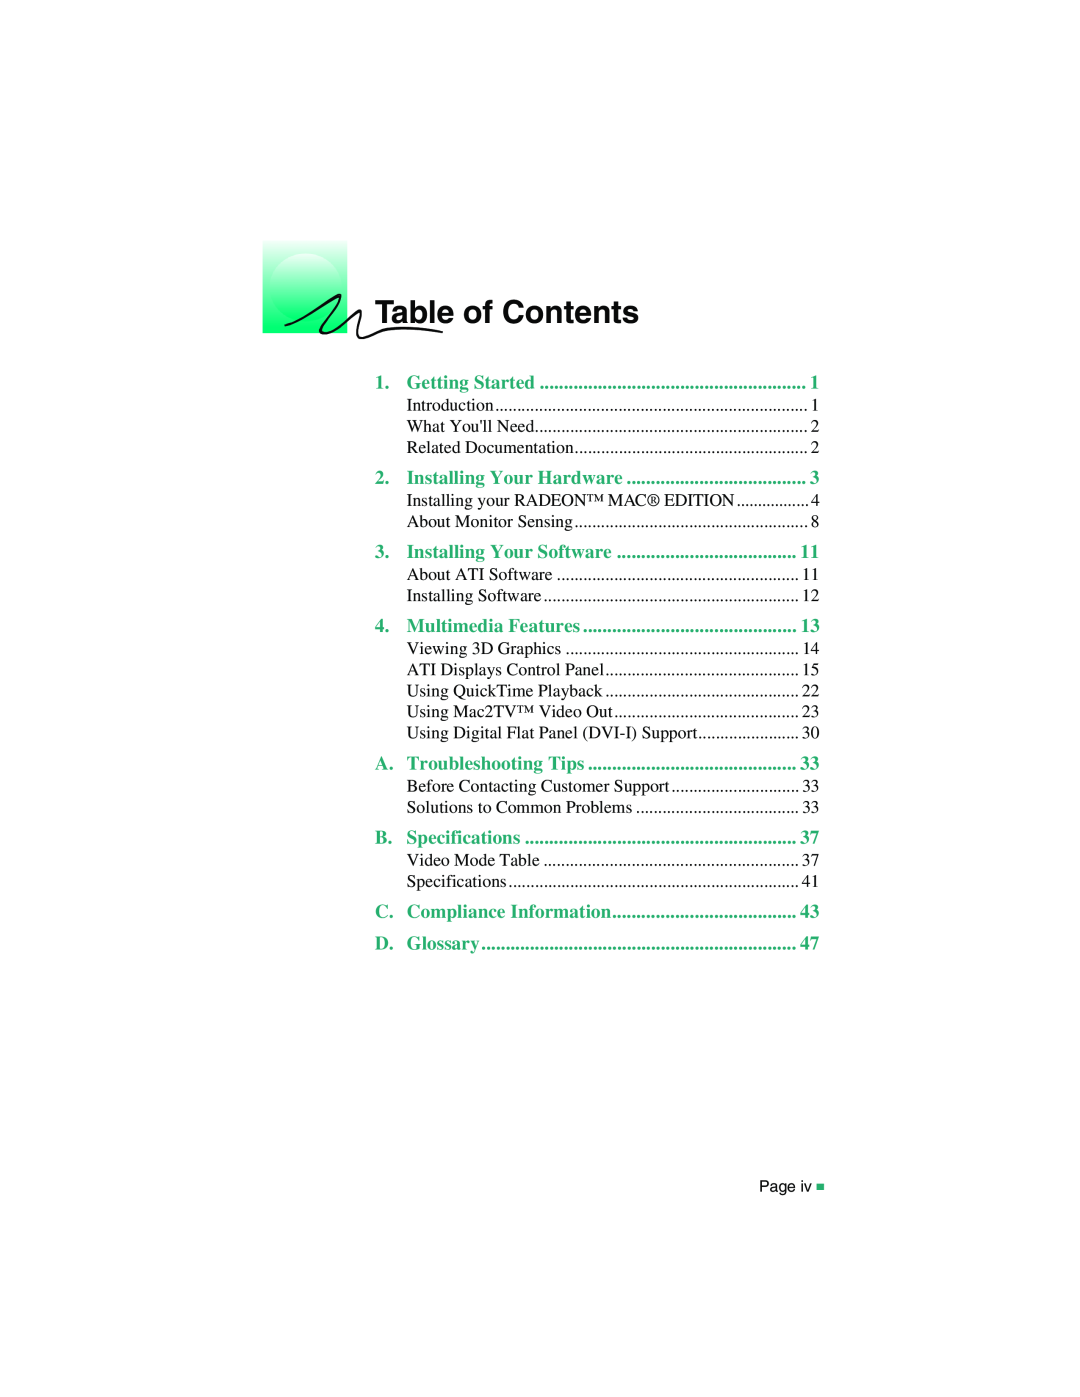 ATI Technologies RADEON MAC EDITION Table of Contents, C. Compliance Information, Getting Started, Multimedia Features 